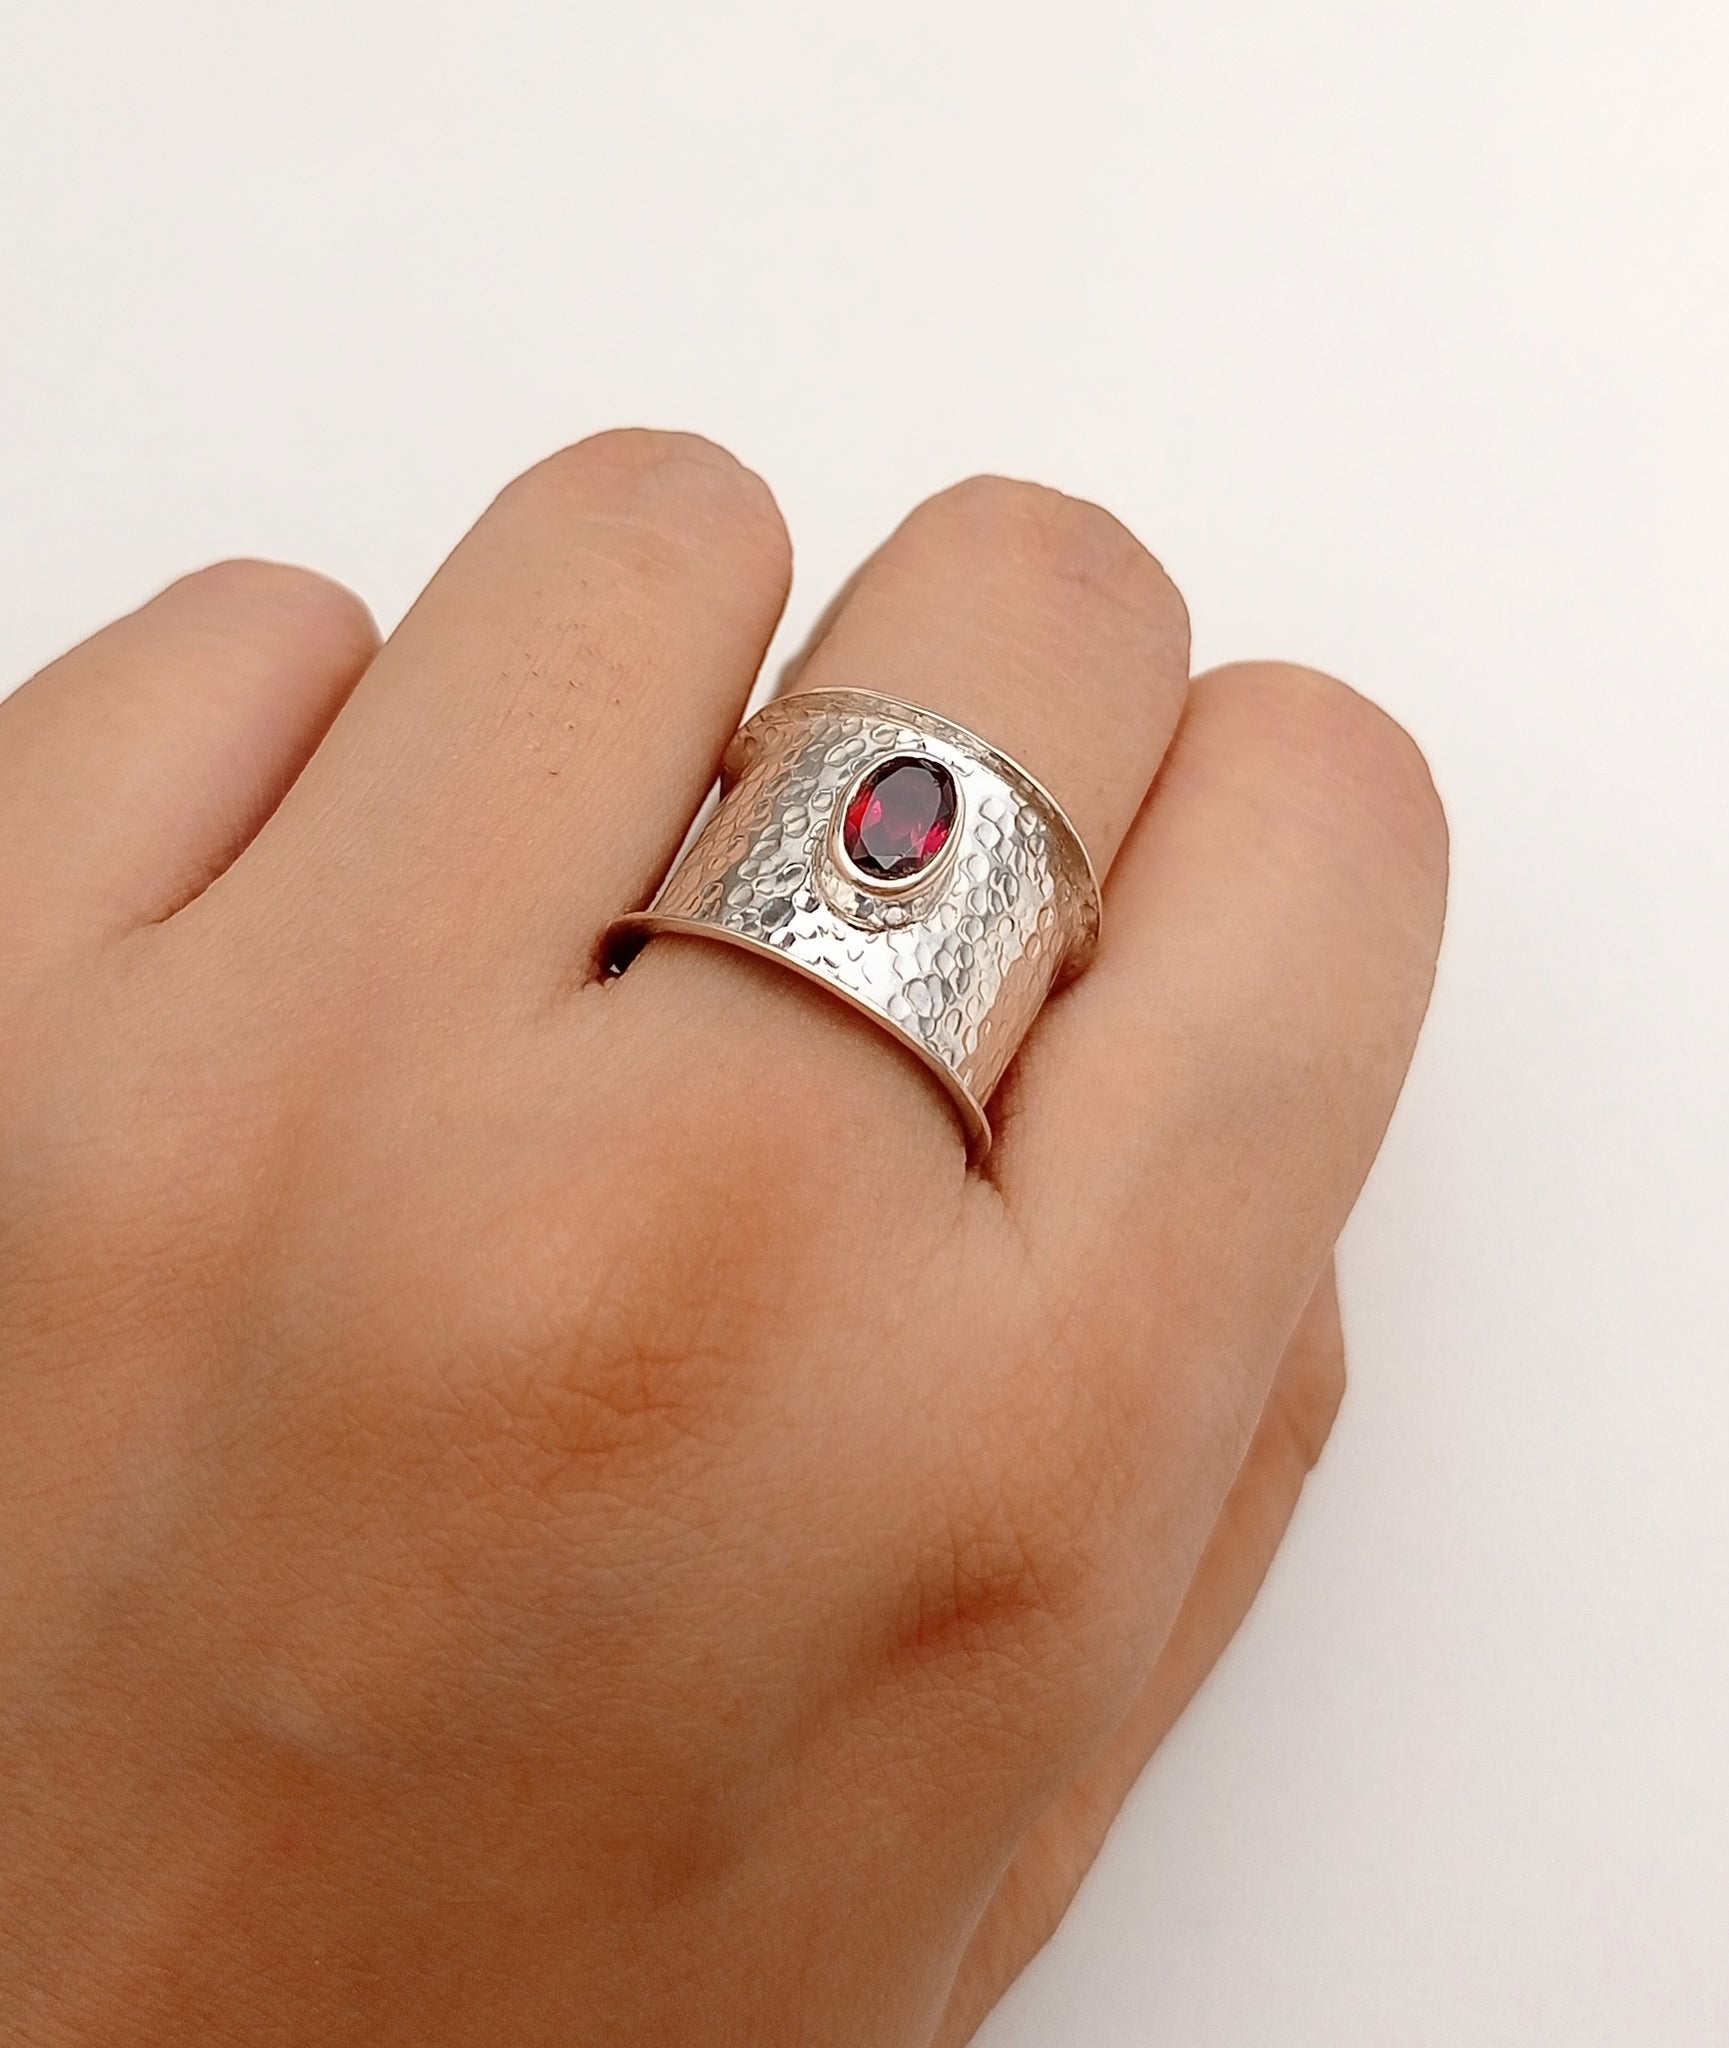 KUNDLI GEMS Gomed/Garnet Stone Ring Natural 7.25 ratti Stone Certified  Astrological For Unisex Stone Garnet Silver Plated Ring Price in India -  Buy KUNDLI GEMS Gomed/Garnet Stone Ring Natural 7.25 ratti Stone